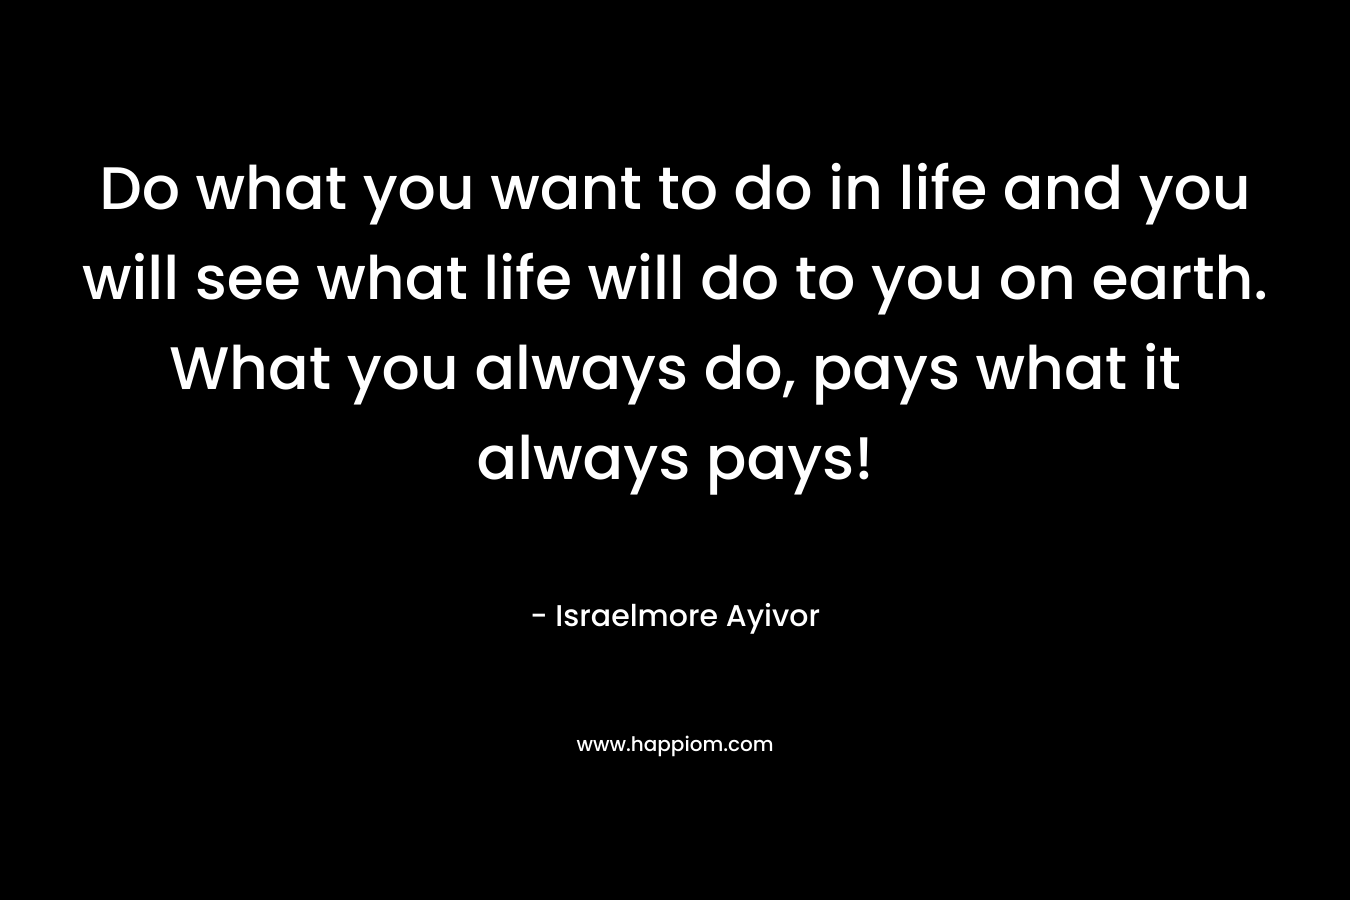 Do what you want to do in life and you will see what life will do to you on earth. What you always do, pays what it always pays!